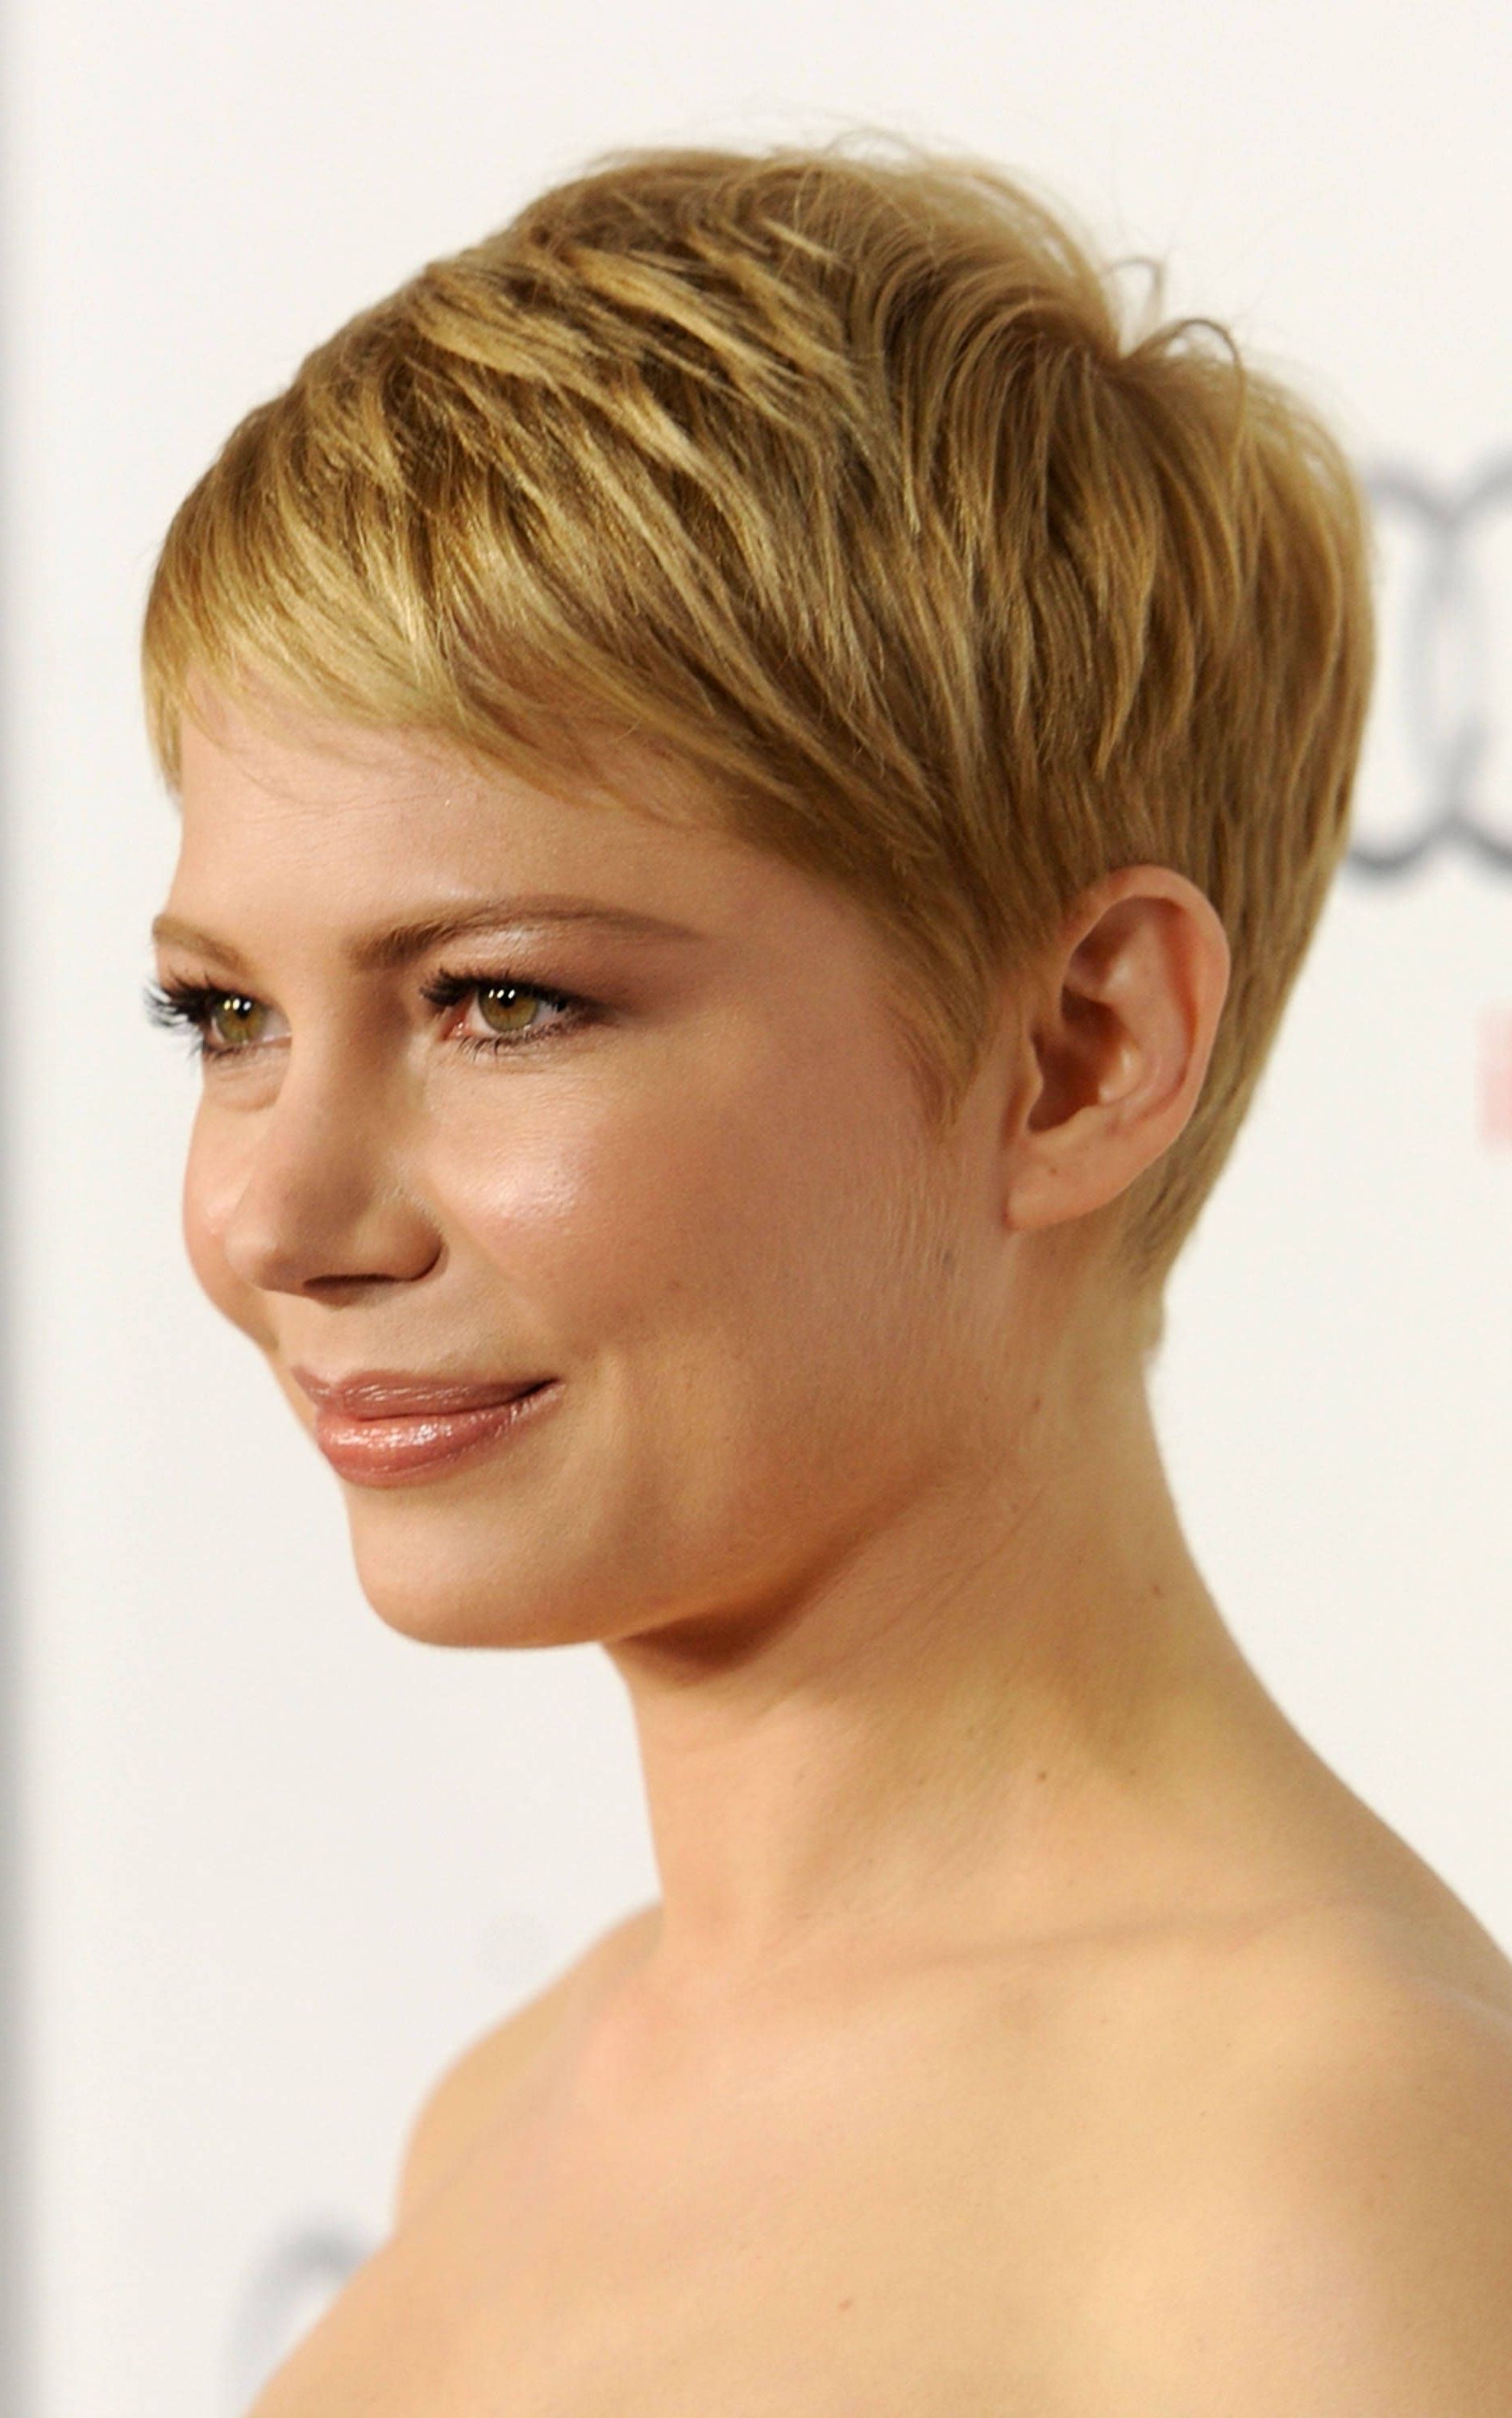 Celebrity Pixie Haircut Photo Gallery | Pixie | Pinterest | Pixie Intended For Short Haircuts For Celebrities (View 25 of 25)